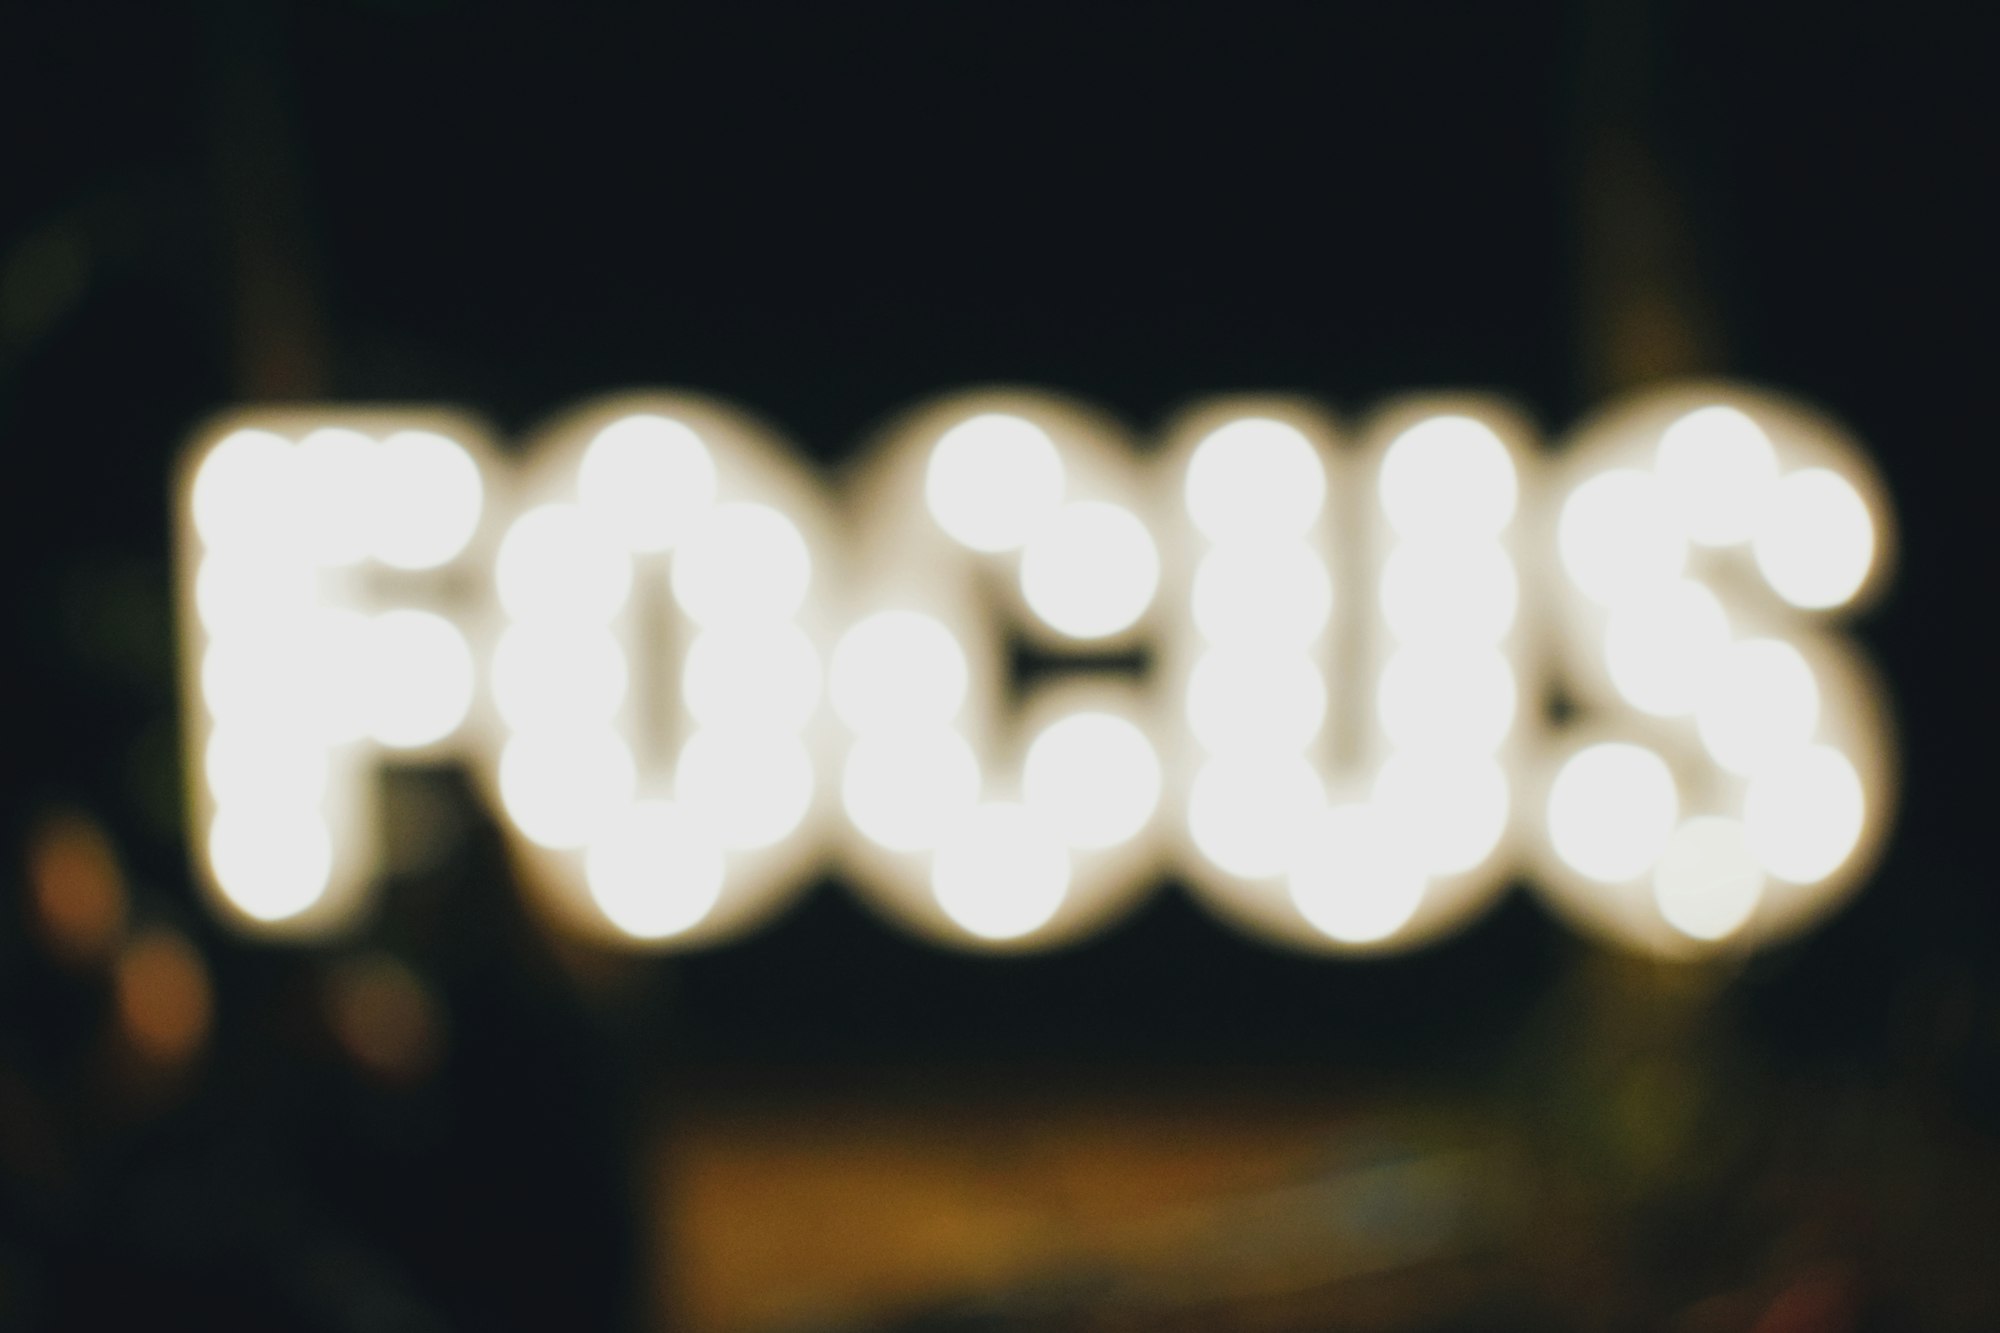 a blurry image of a lit sign reading "FOCUS"